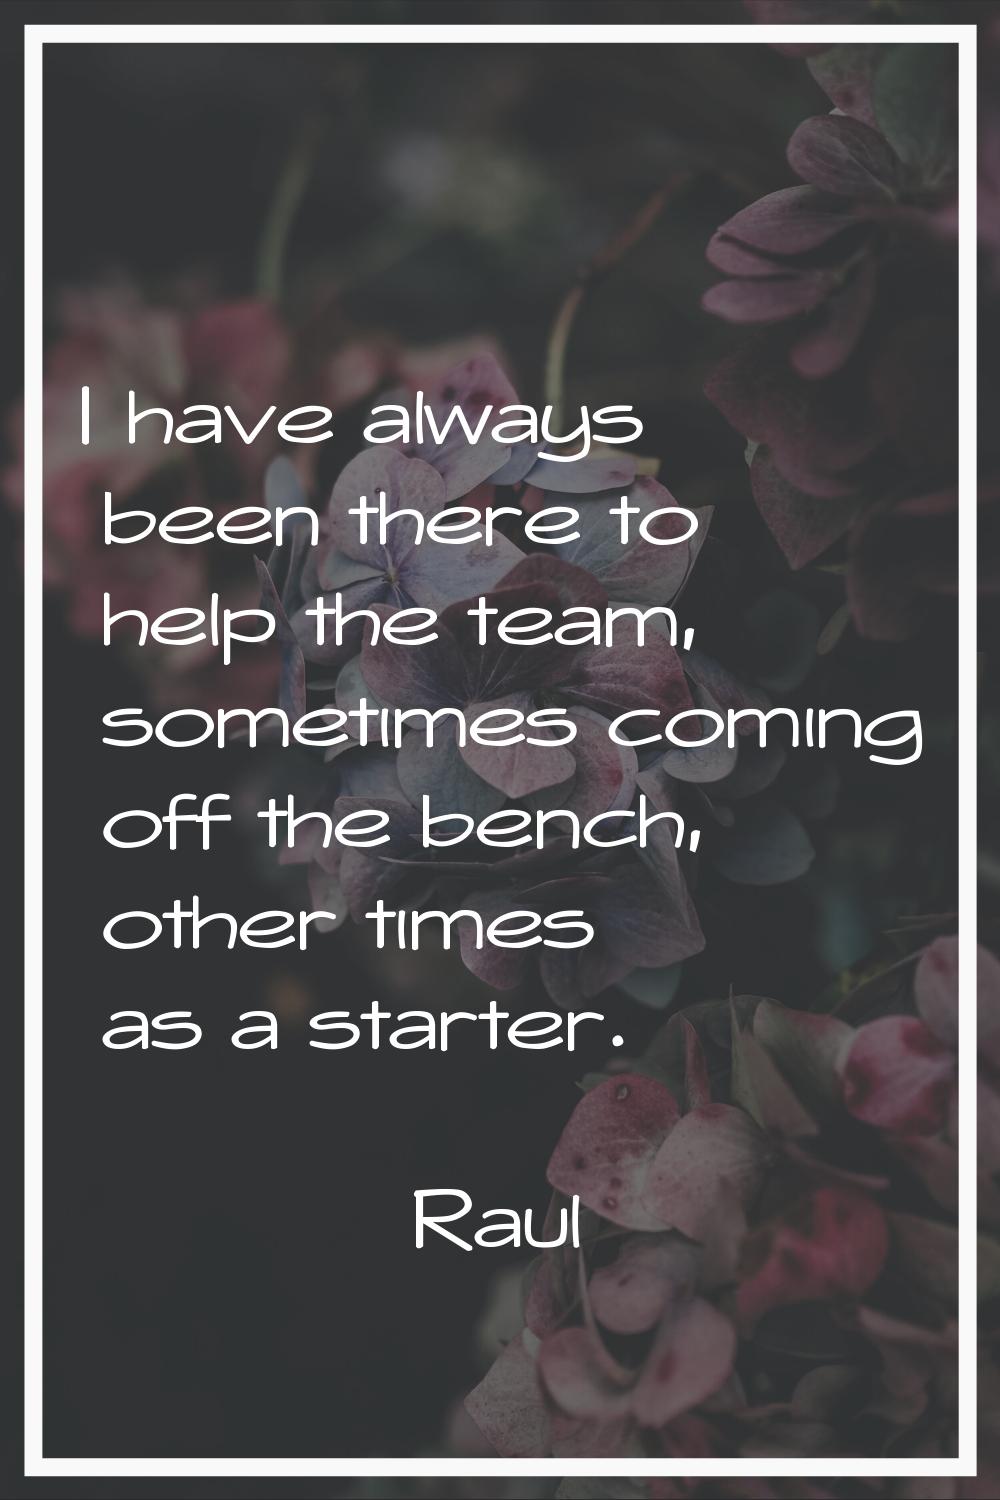 I have always been there to help the team, sometimes coming off the bench, other times as a starter